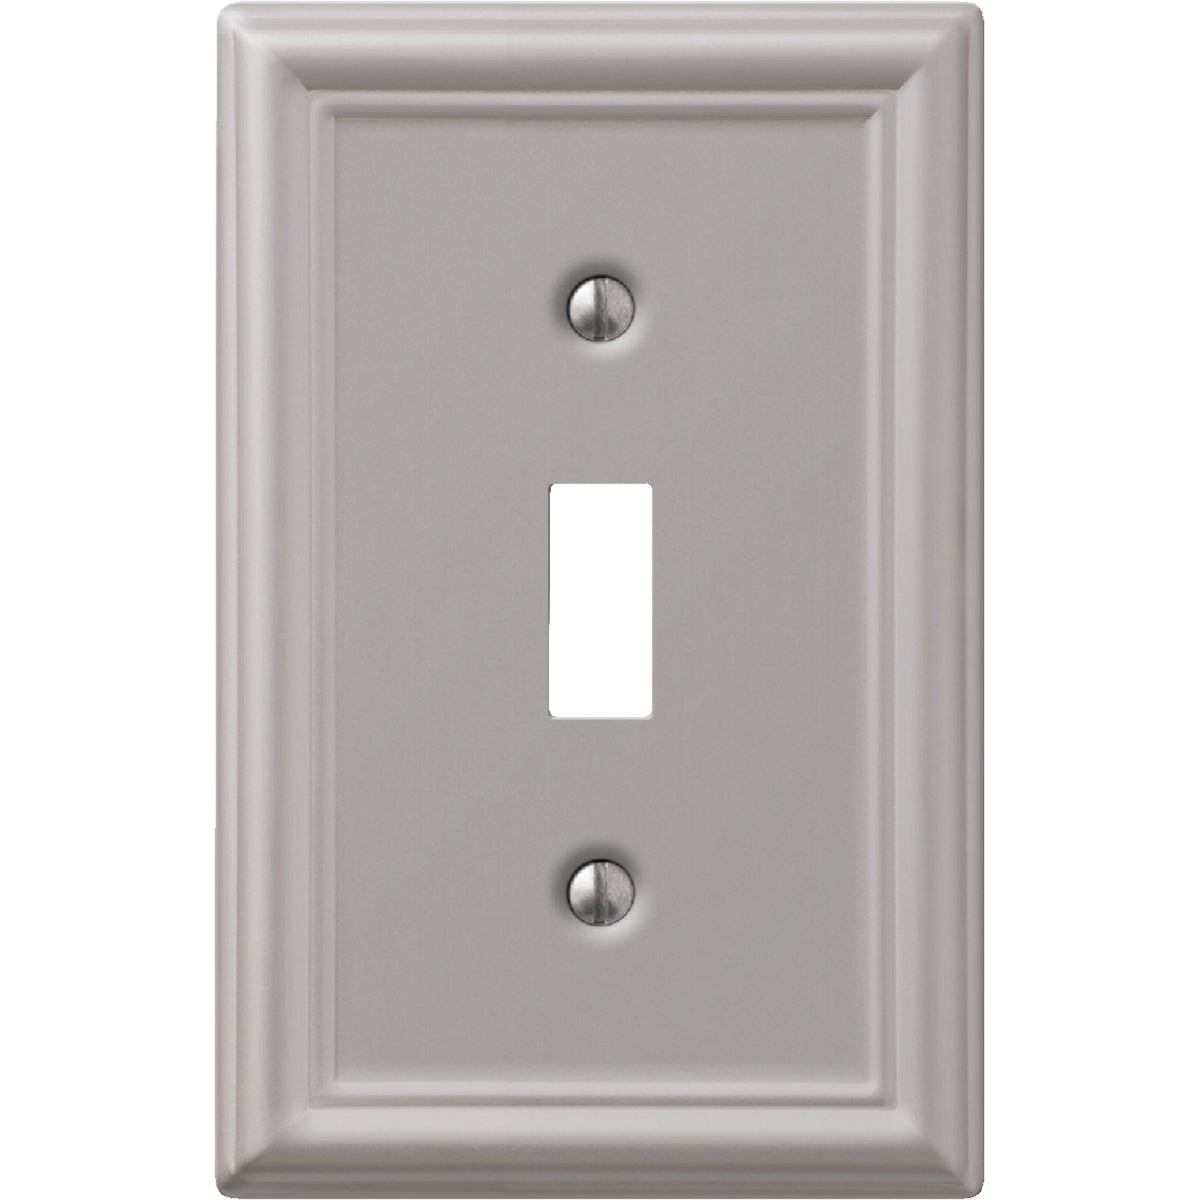 Item 500236, Chelsea stamped steel, toggle switch wall plate.